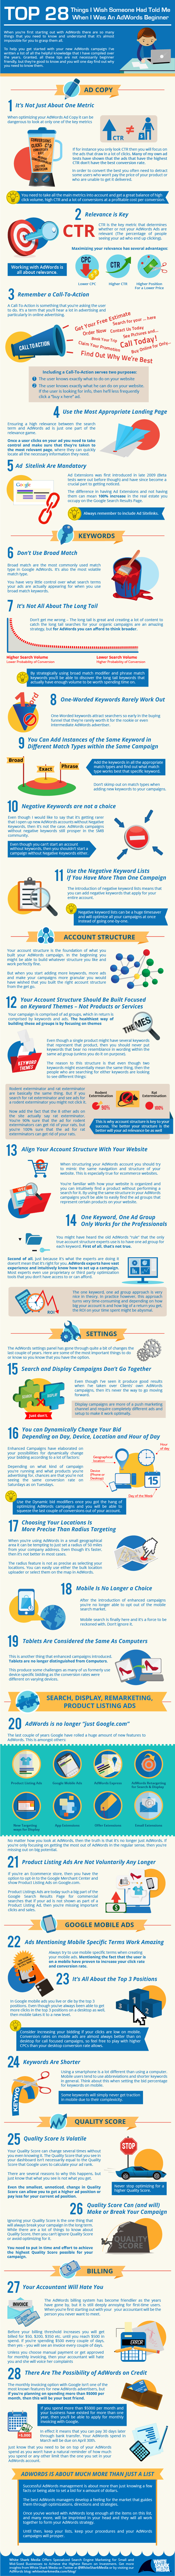 top-28-things-i-wish-someone-had-told-me-when-i-was-an-adwords-beginner-infographic-white-shark-m.png